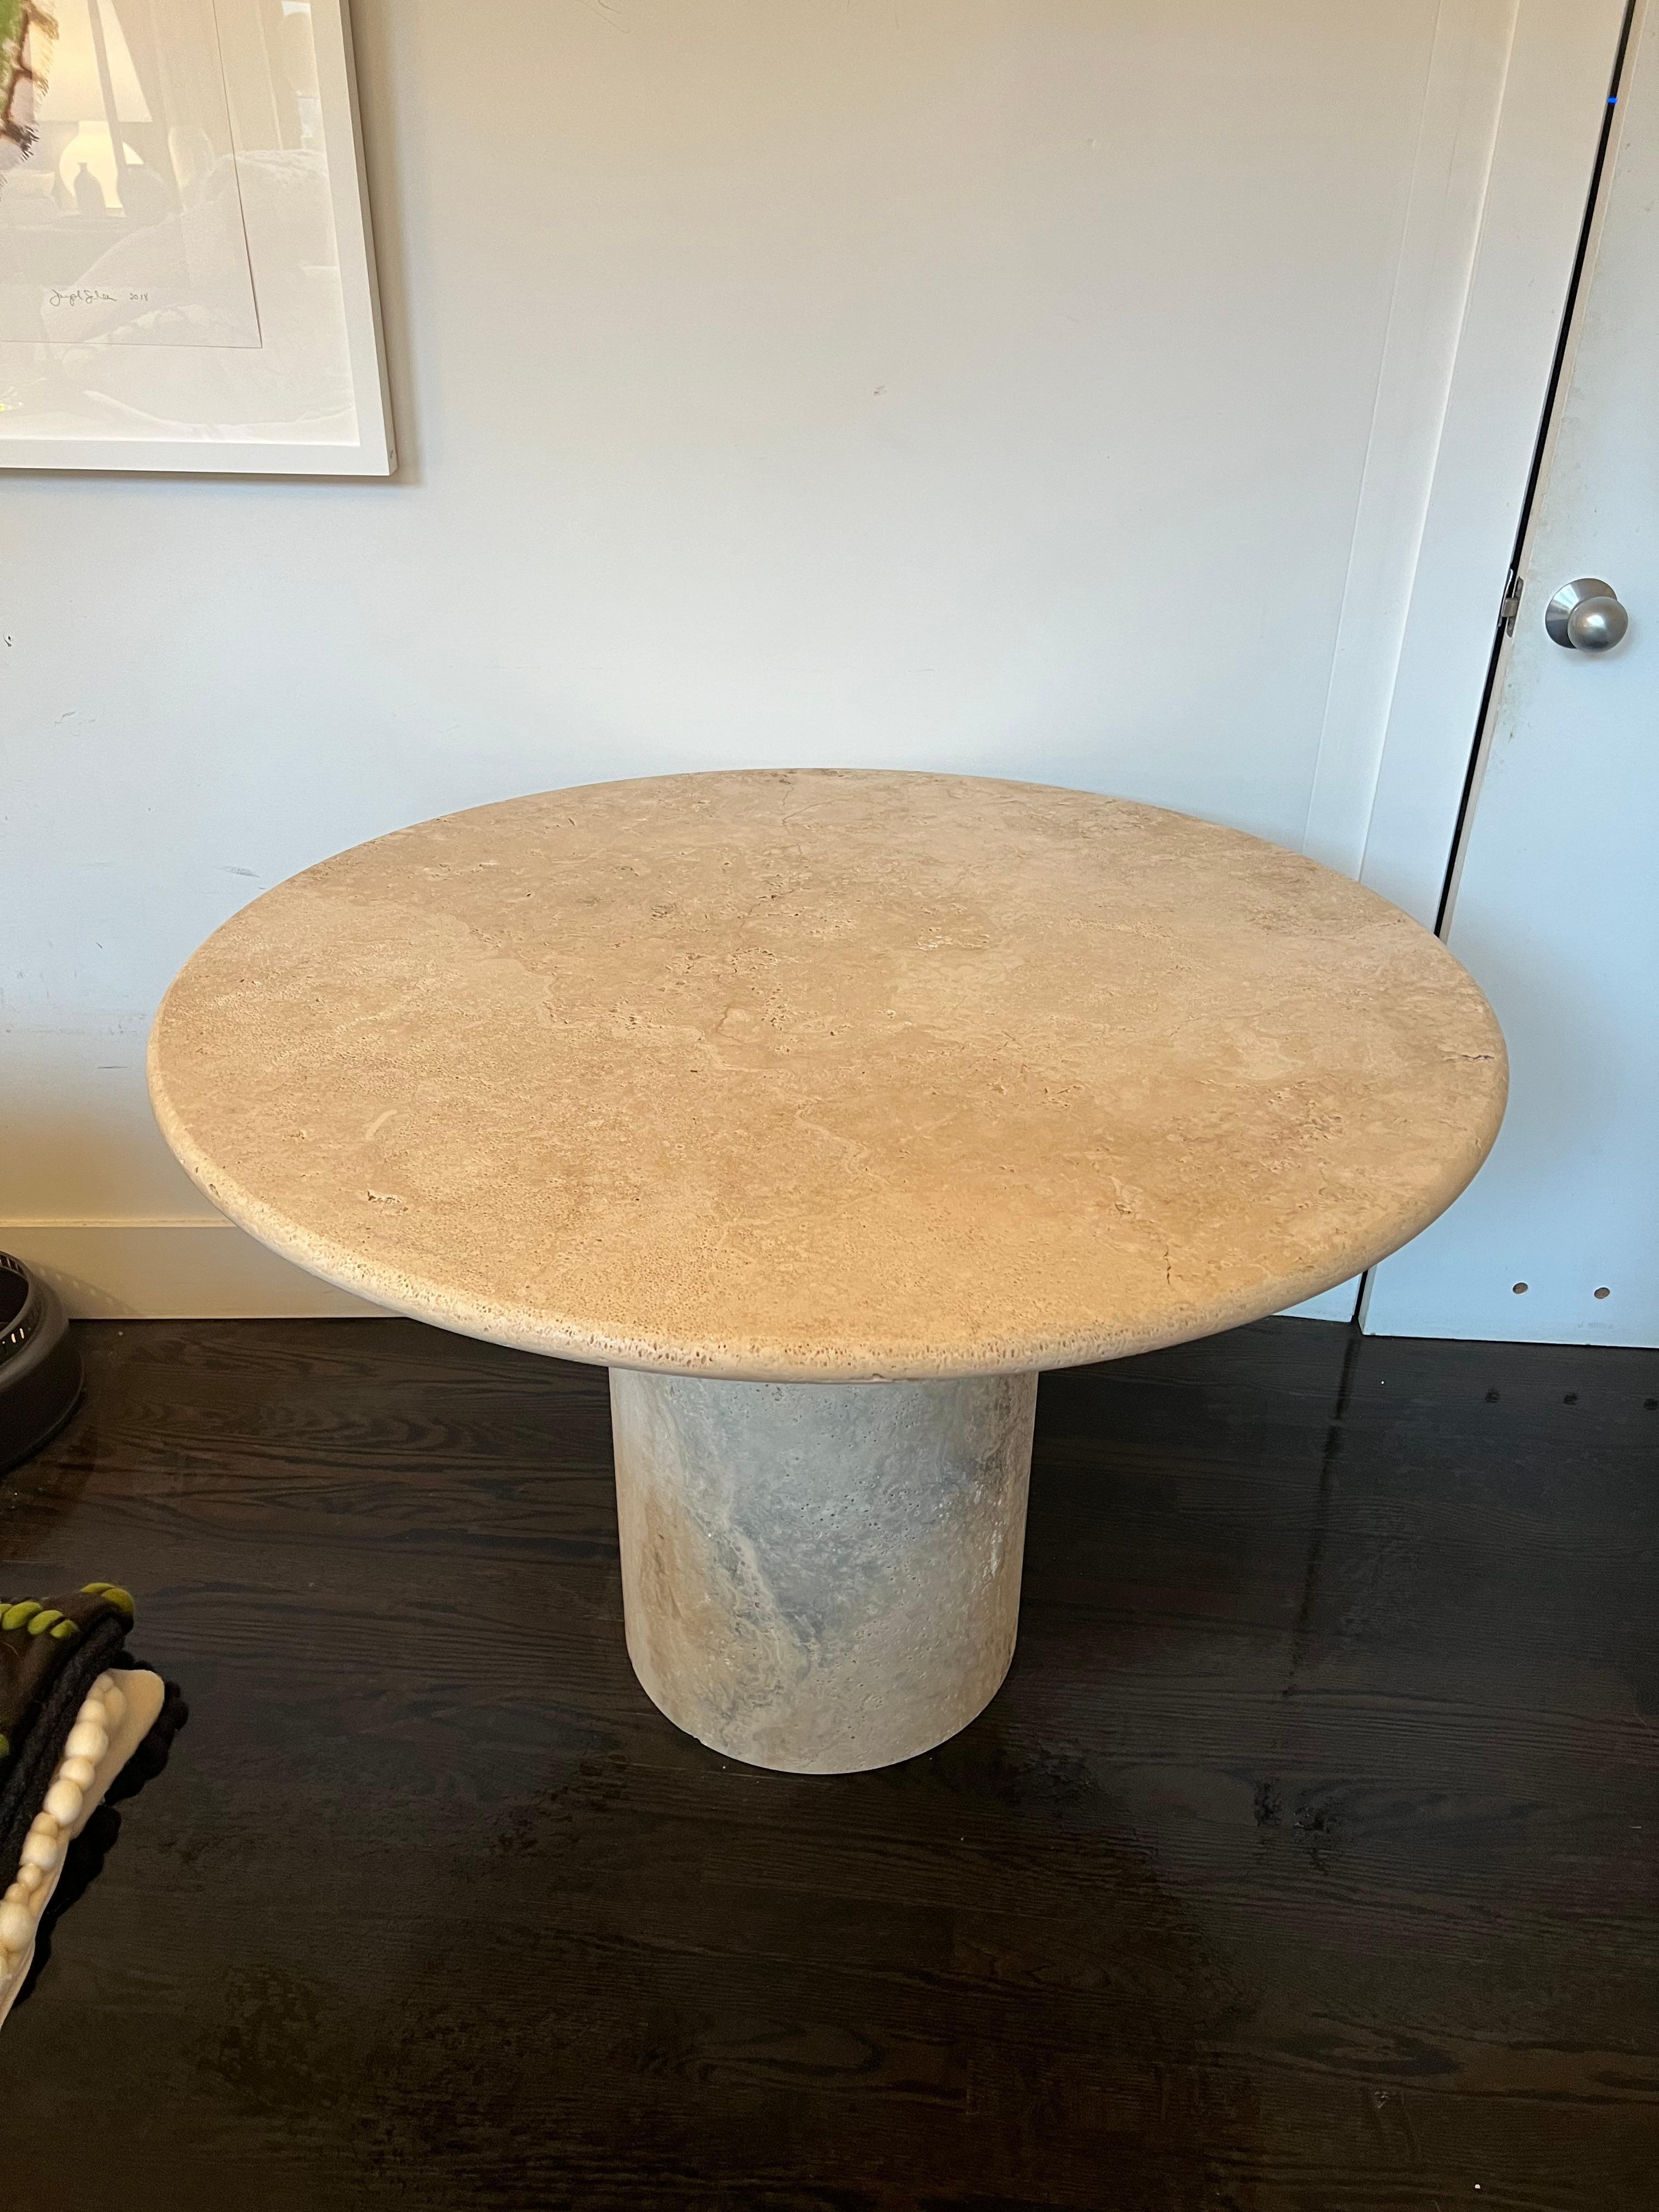 White Roman travertine bistro table by Le Lampade.
Round travertine top supported by a travertine column shaped base. These tables can be custom made.